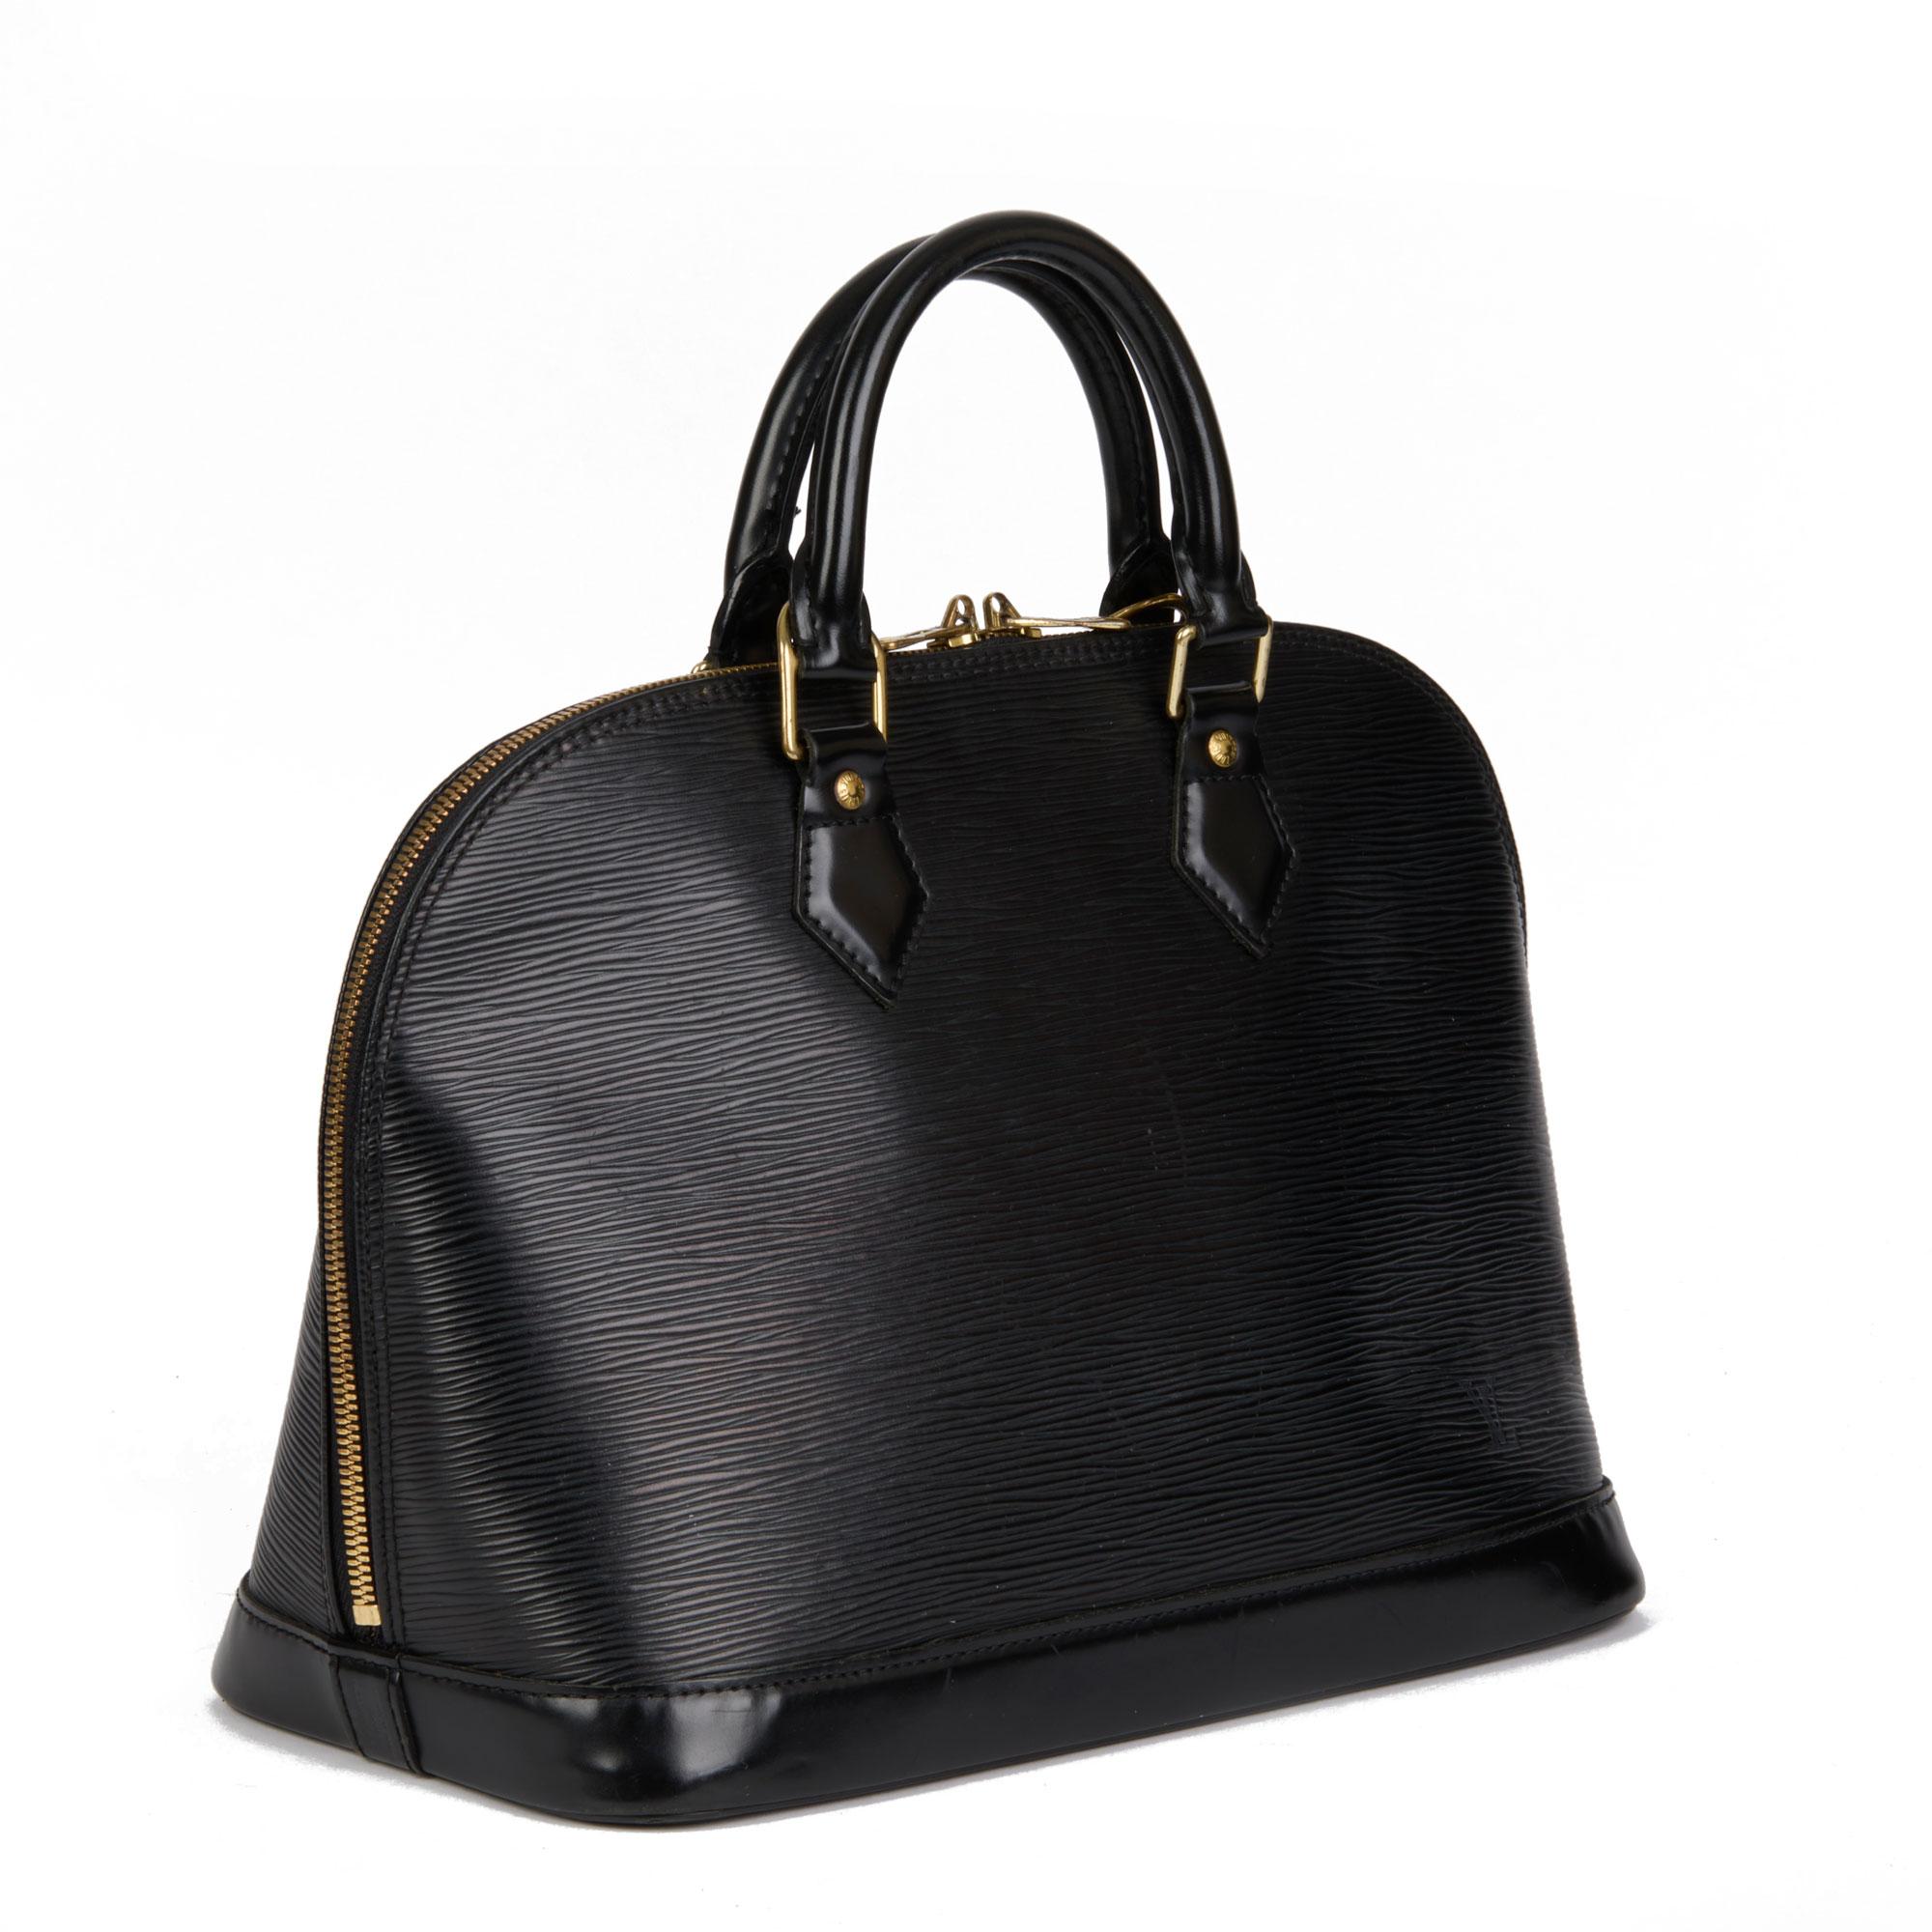 LOUIS VUITTON
Black Epi Leather Vintage Alma PM

Xupes Reference: CB631
Serial Number: MI0060
Age (Circa): 2000
Authenticity Details: Date Stamp (Made in France)
Gender: Ladies
Type: Tote

Colour: Black
Hardware: Golden Brass
Material(s): Epi